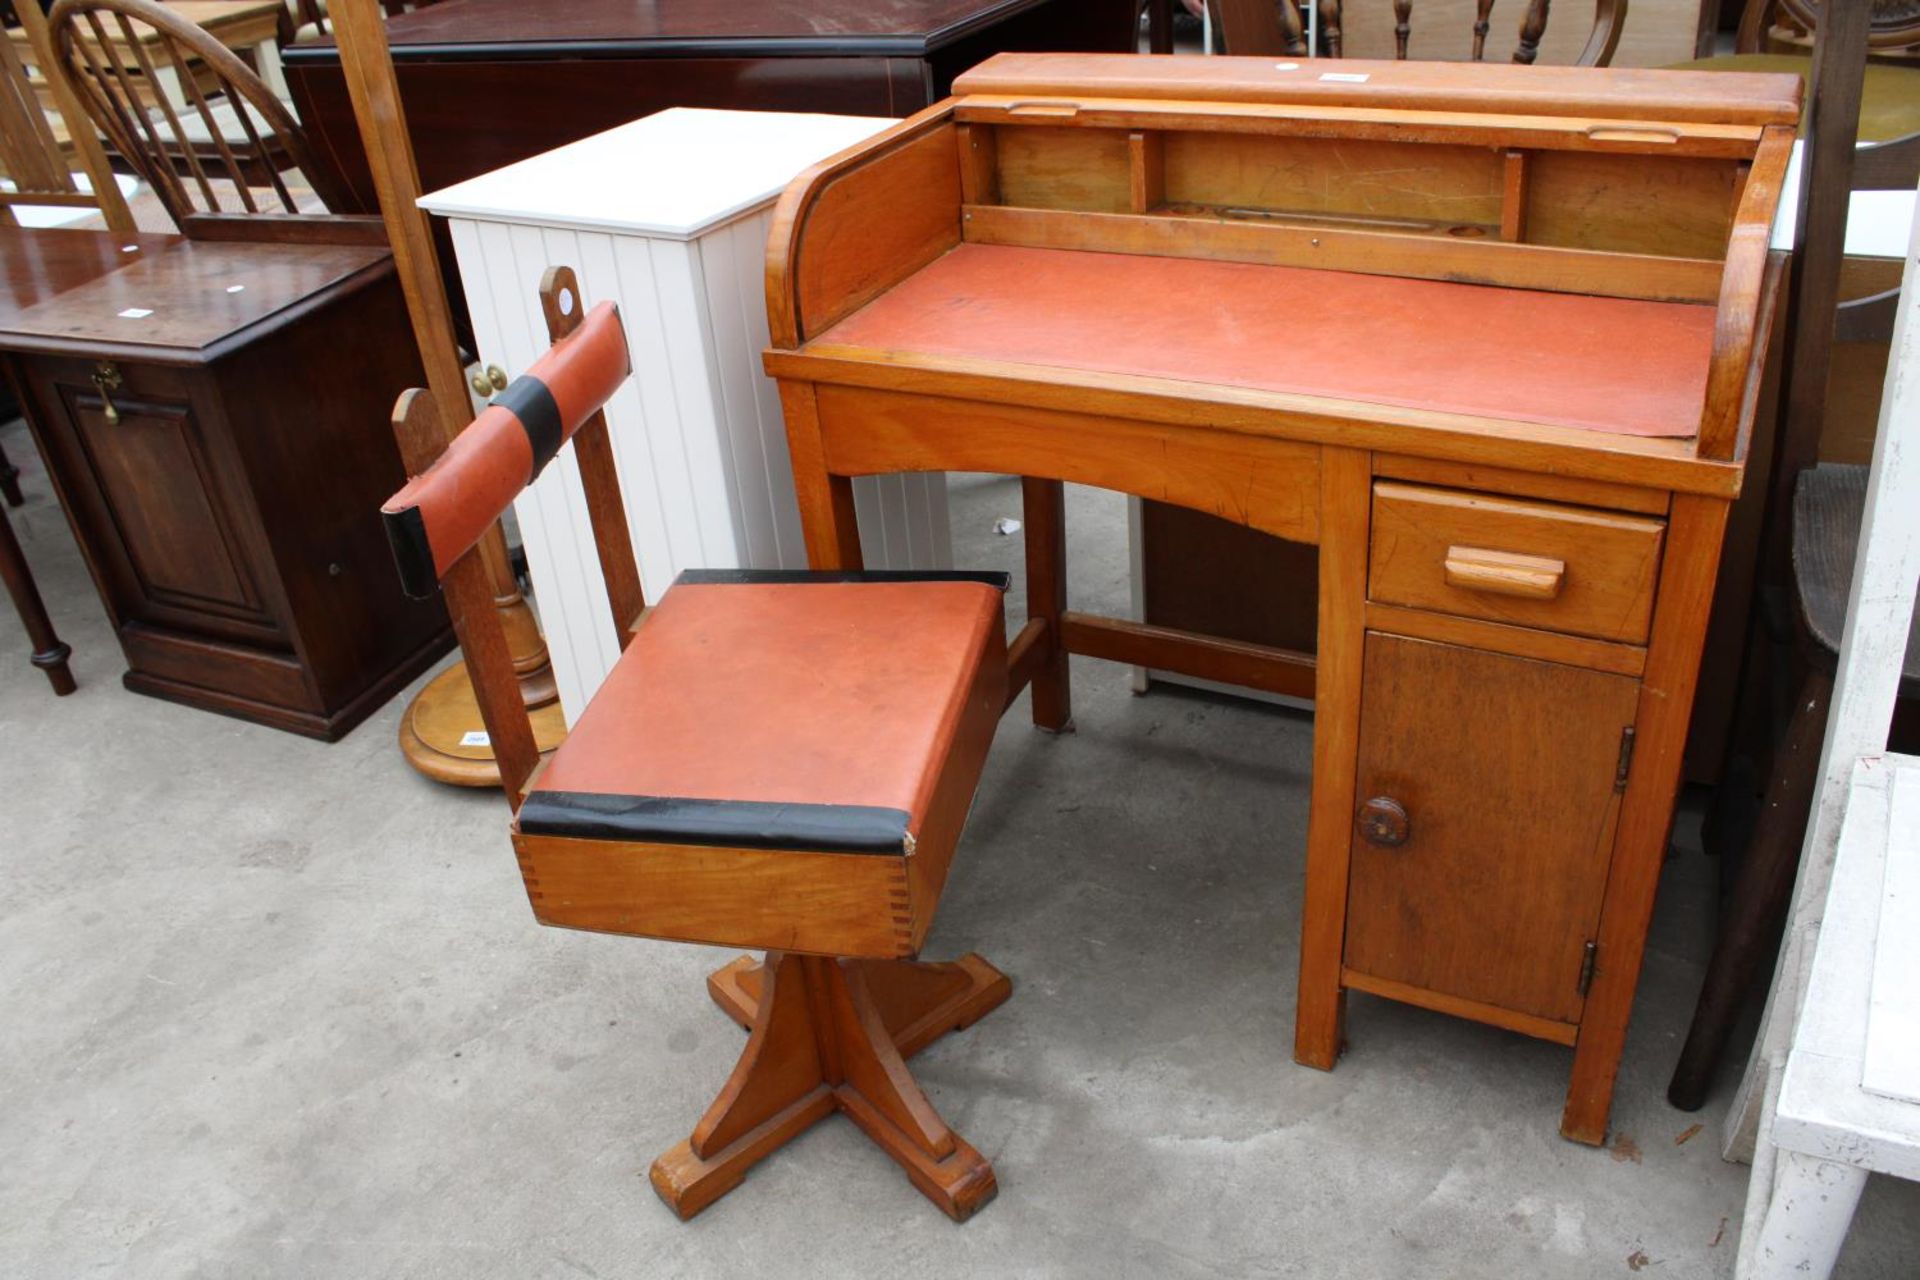 A MID 20TH CENTURY CHILDS ROLL-TOP DESK AND A SWIVEL CHAIR - Image 3 of 3